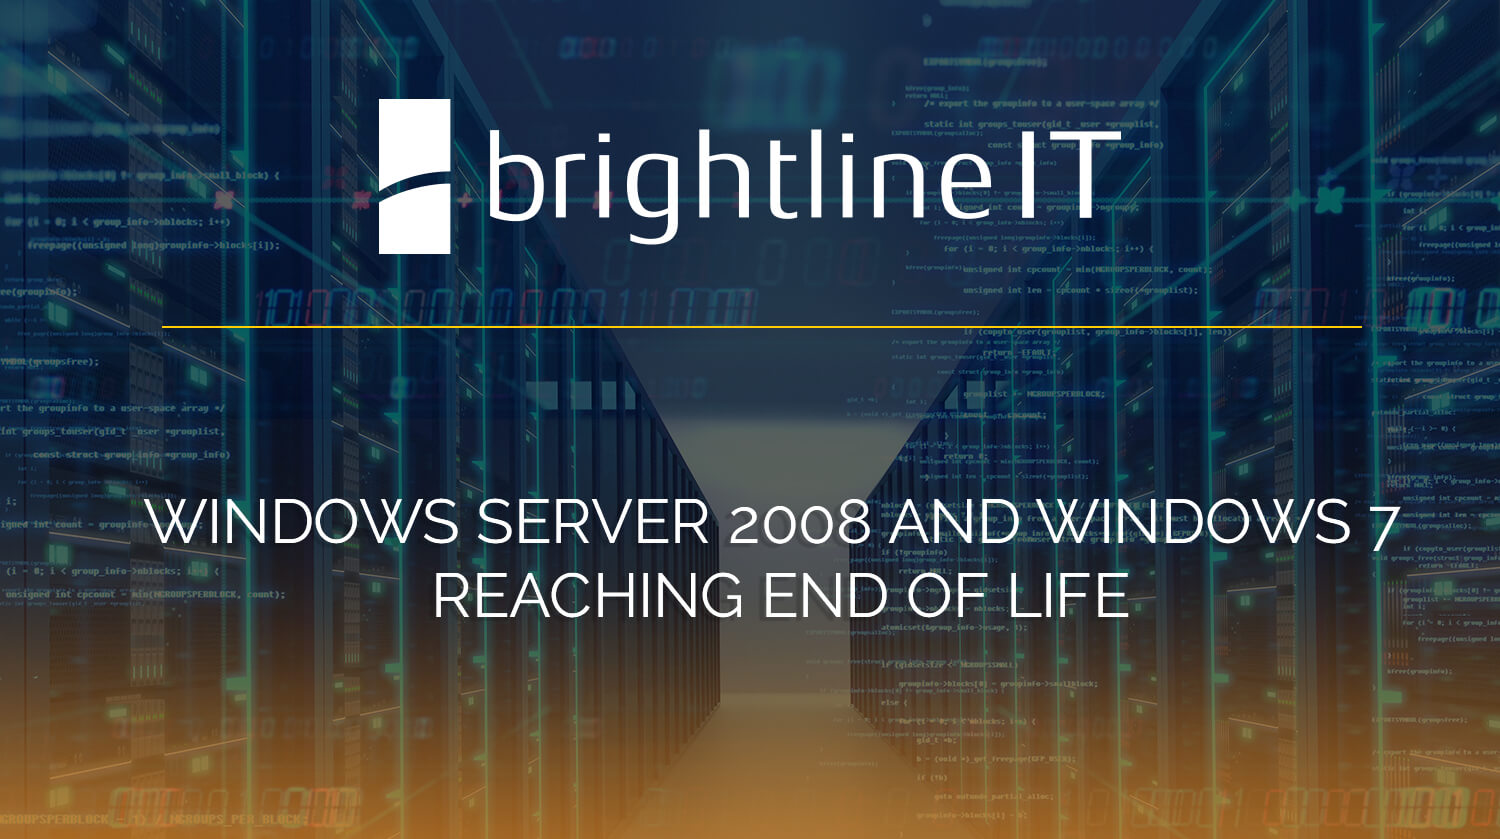 Windows Server 2008 and Windows 7 Reaching End of Life